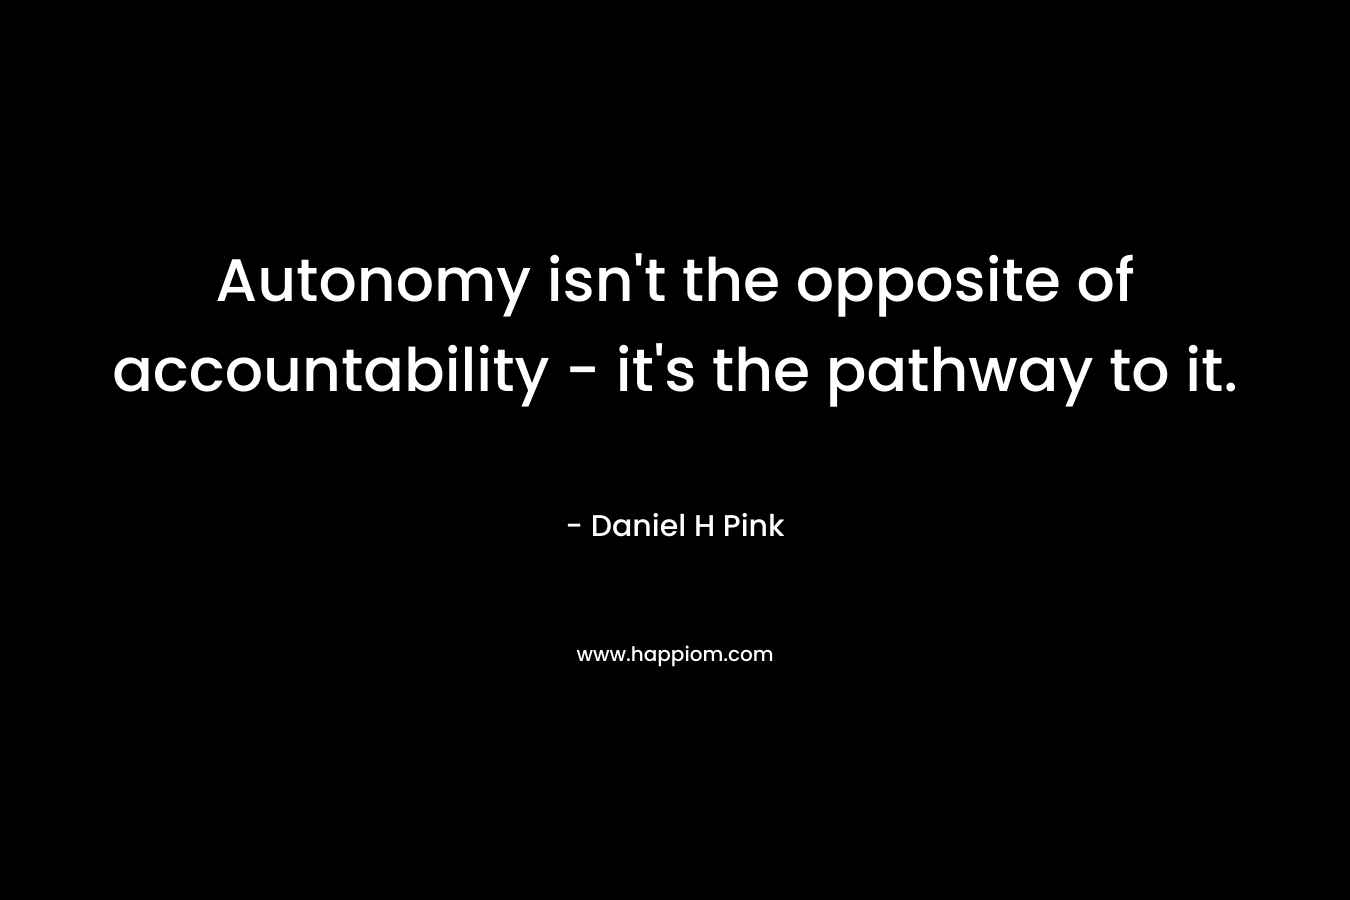 Autonomy isn’t the opposite of accountability – it’s the pathway to it. – Daniel H Pink